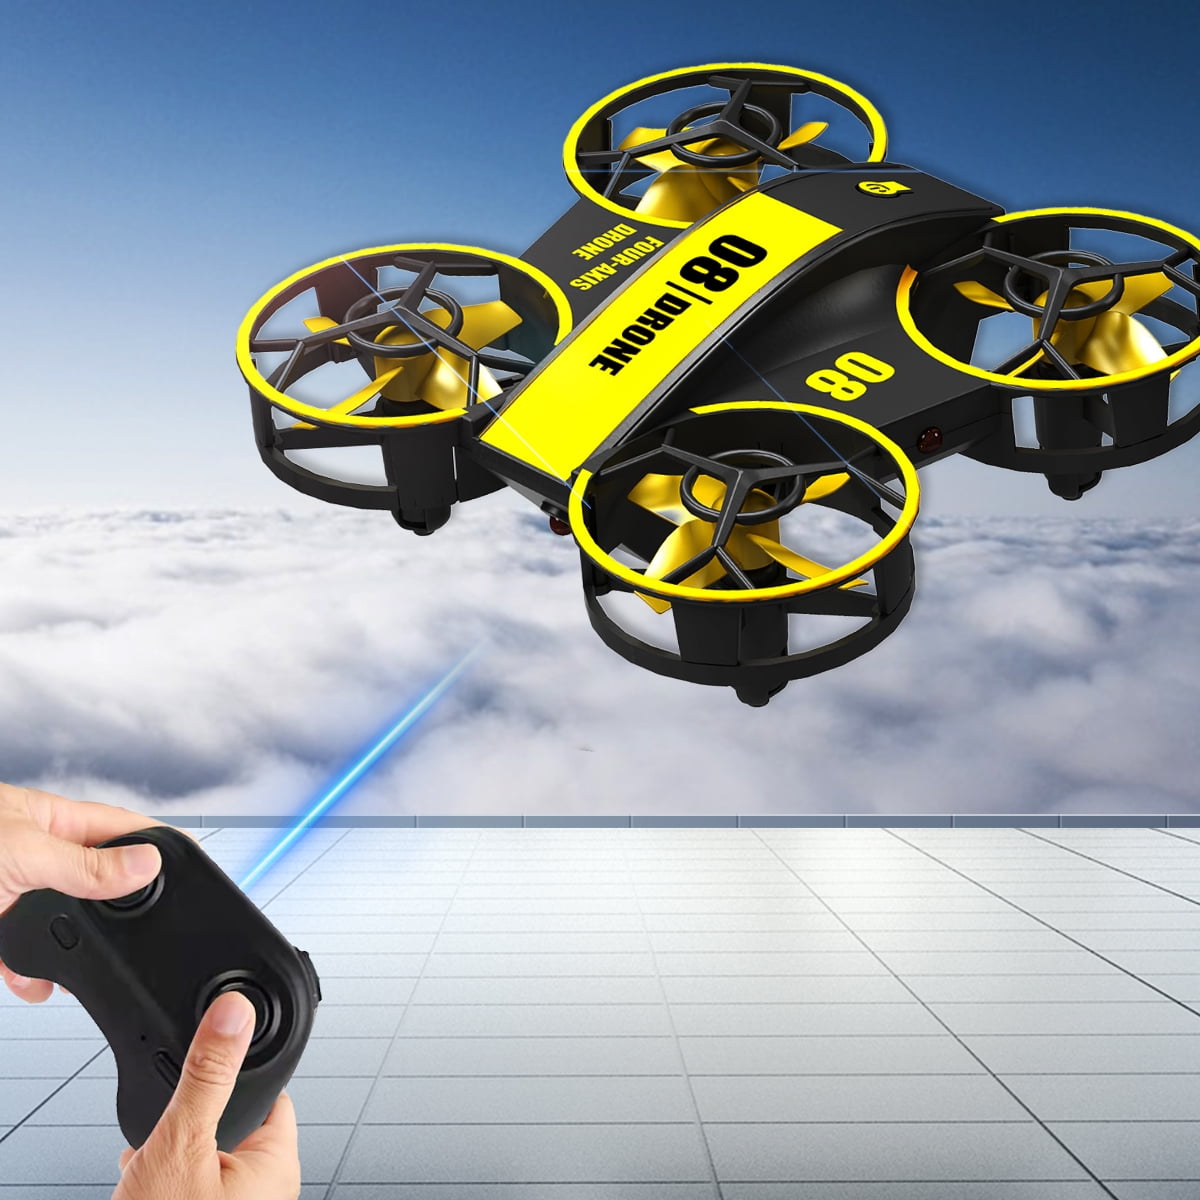 Mini Drone for Kids and Beginners-Remote Control Quadcopter Indoor Helicopter Plane with 3D Flip, Auto Hovering, Headless Mode, 3 Batteries, Best Gift Toy for Boys & Girls,Yellow